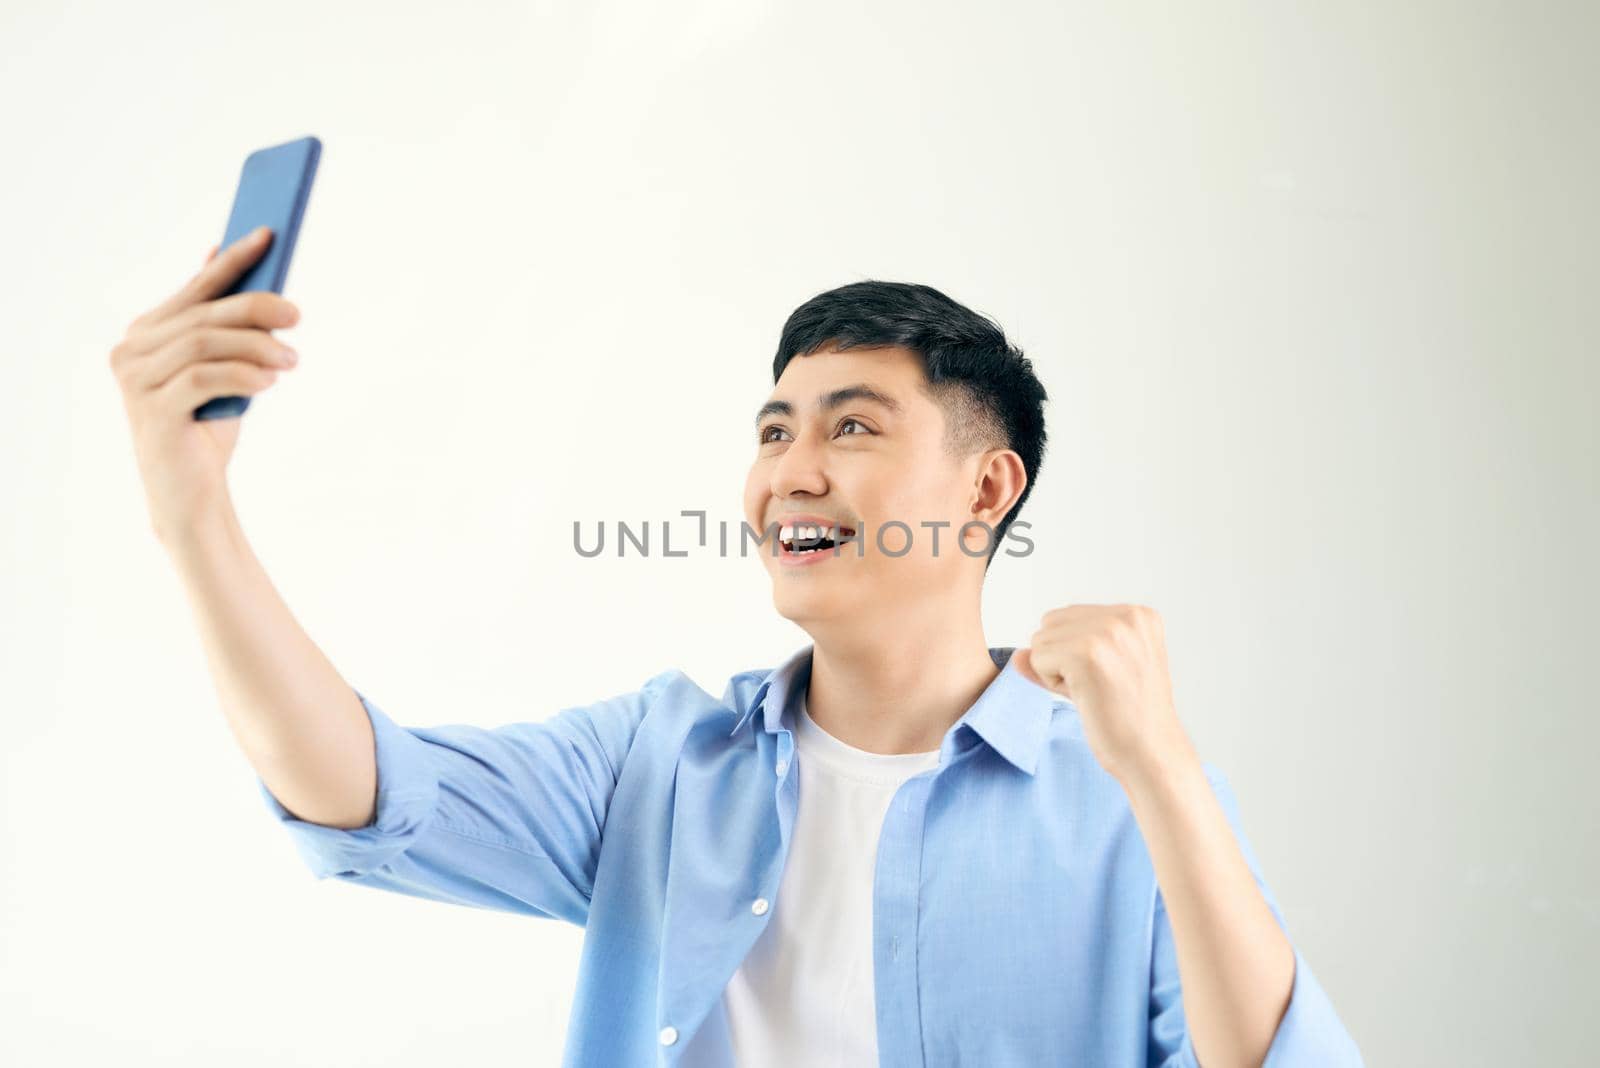 Handsome smiling man is standing, holding telephone and taking a selfie